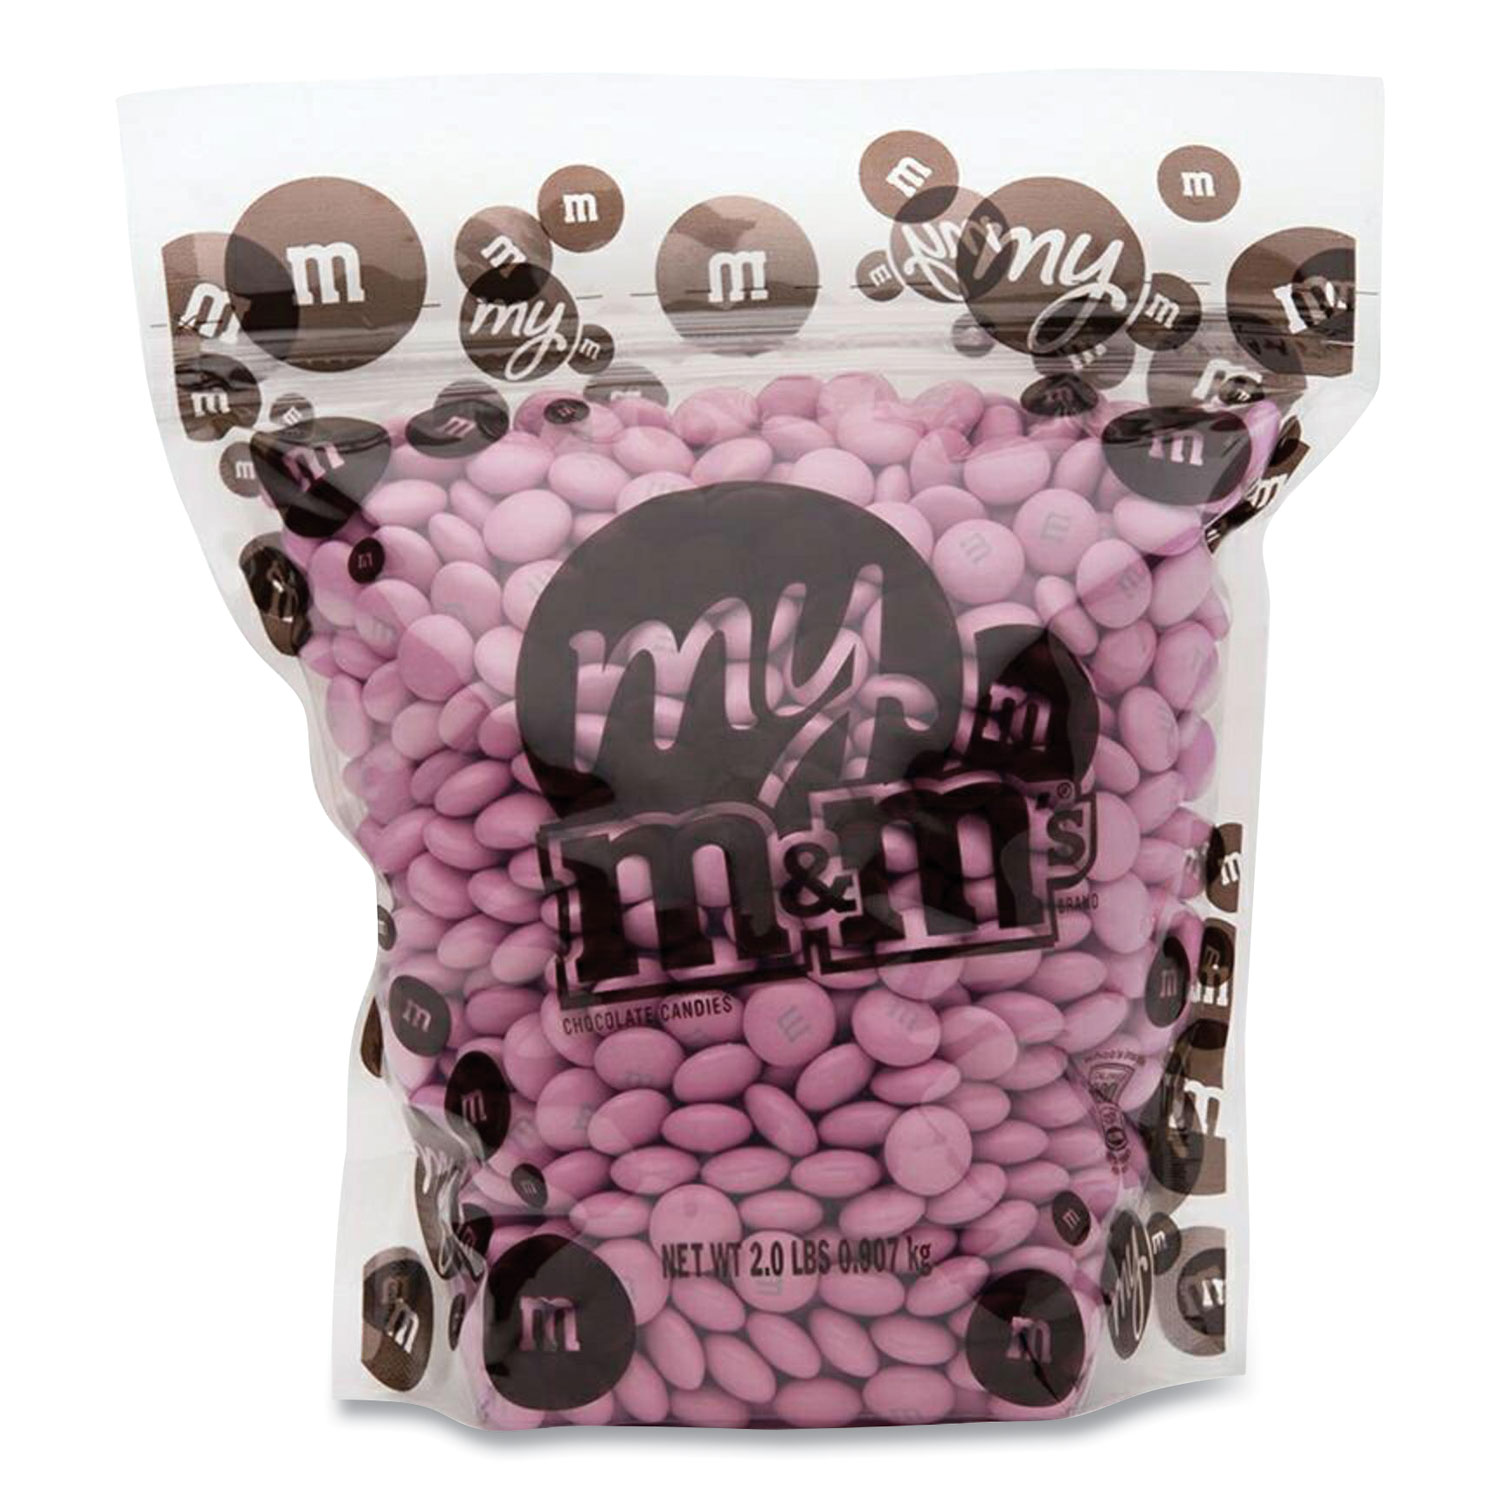  M & M's D01073 My M and M's Bulk Candies, 2 lb Bag, Light Pink, Free Delivery in 1-4 Business Days (GRR22500015) 